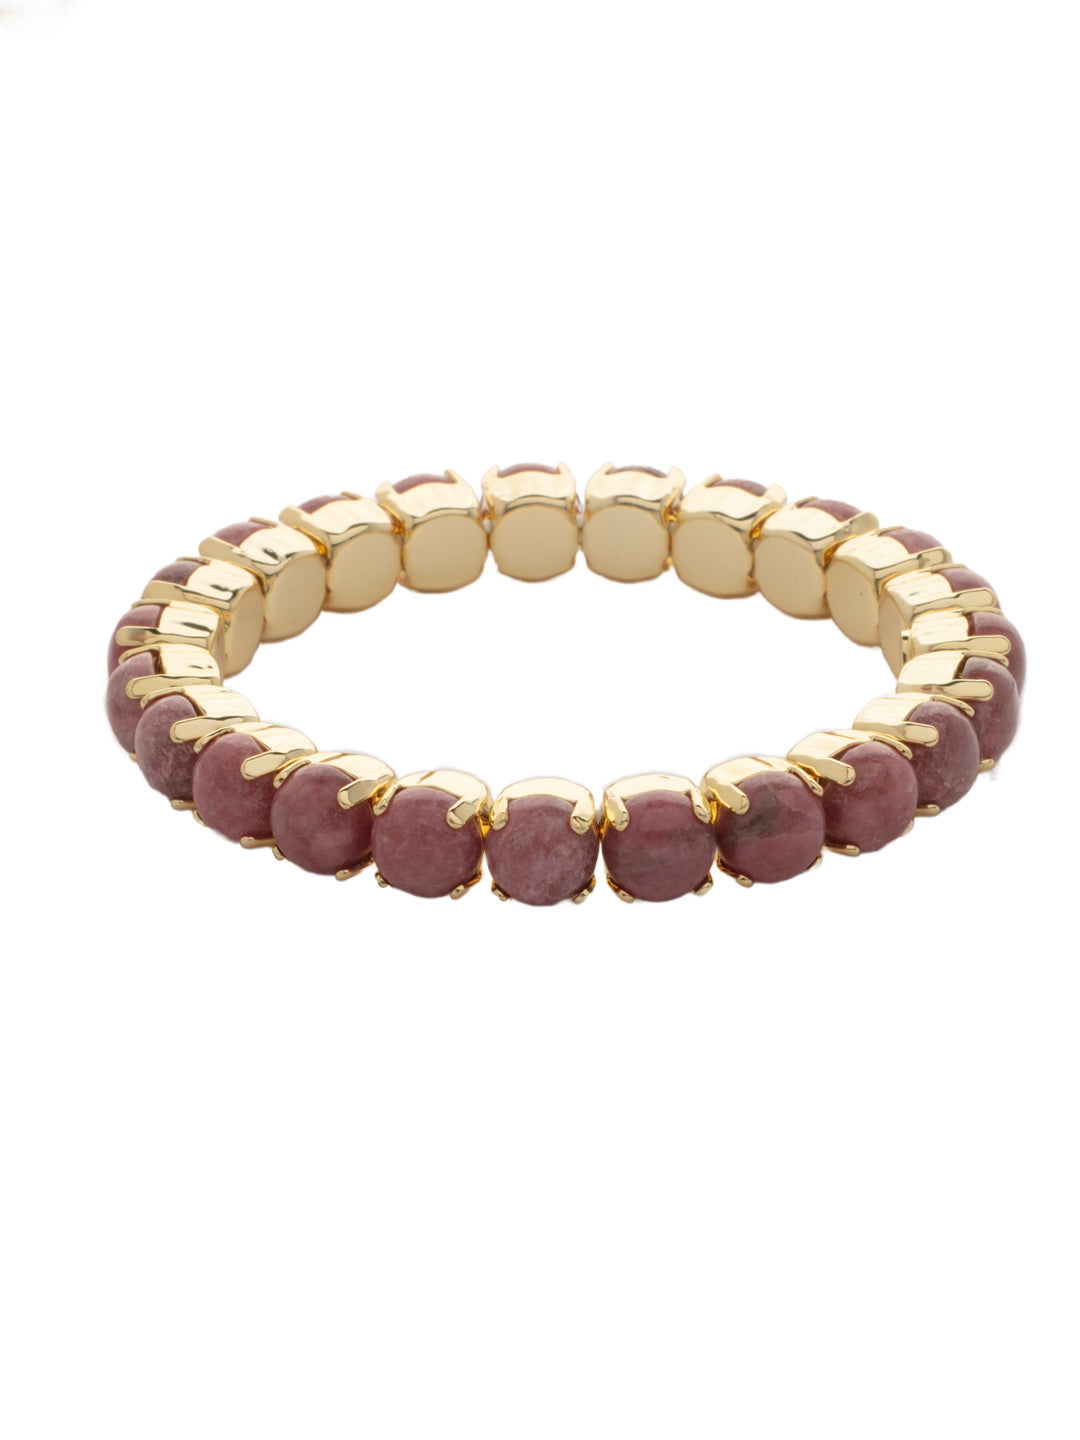 7 inch Sienna Stretch Bracelet - BFD50BGCF - <p>A modern take on a classic style, the Sienna Stretch Bracelet features a line of crystals on a sturdy jewelers' filament, stretching to fit most wrists comfortably, without the hassle of a clasp! (7 inches in diameter, fits average wrist sizes) From Sorrelli's Coneflower collection in our Bright Gold-tone finish.</p>